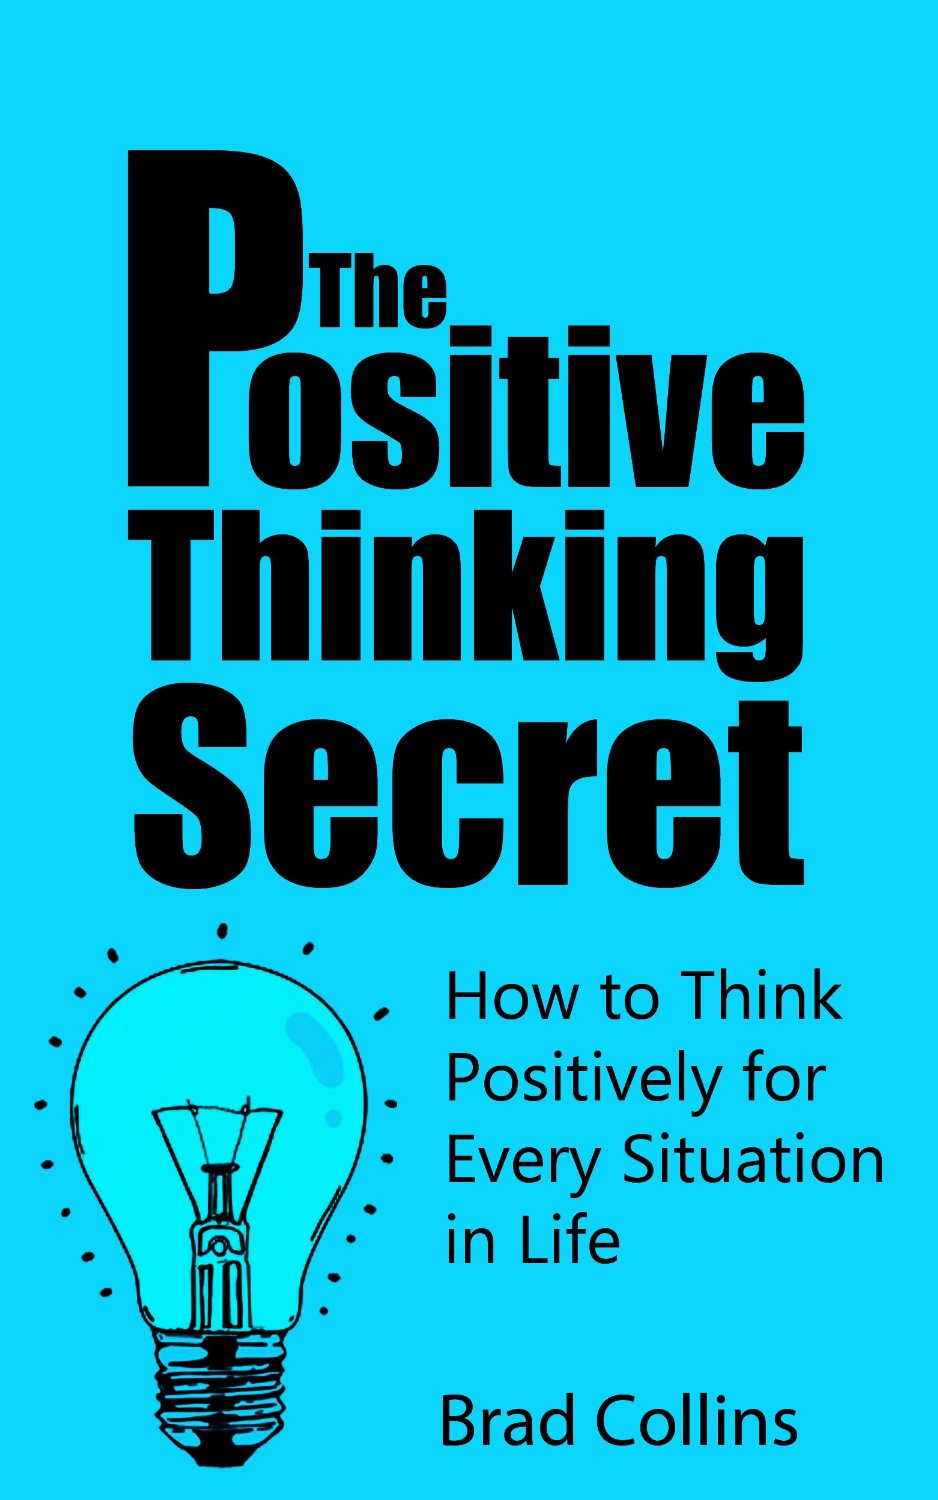 The Positive Thinking Secret – How to Think Positively for Every Situation in Life by Brad Collins